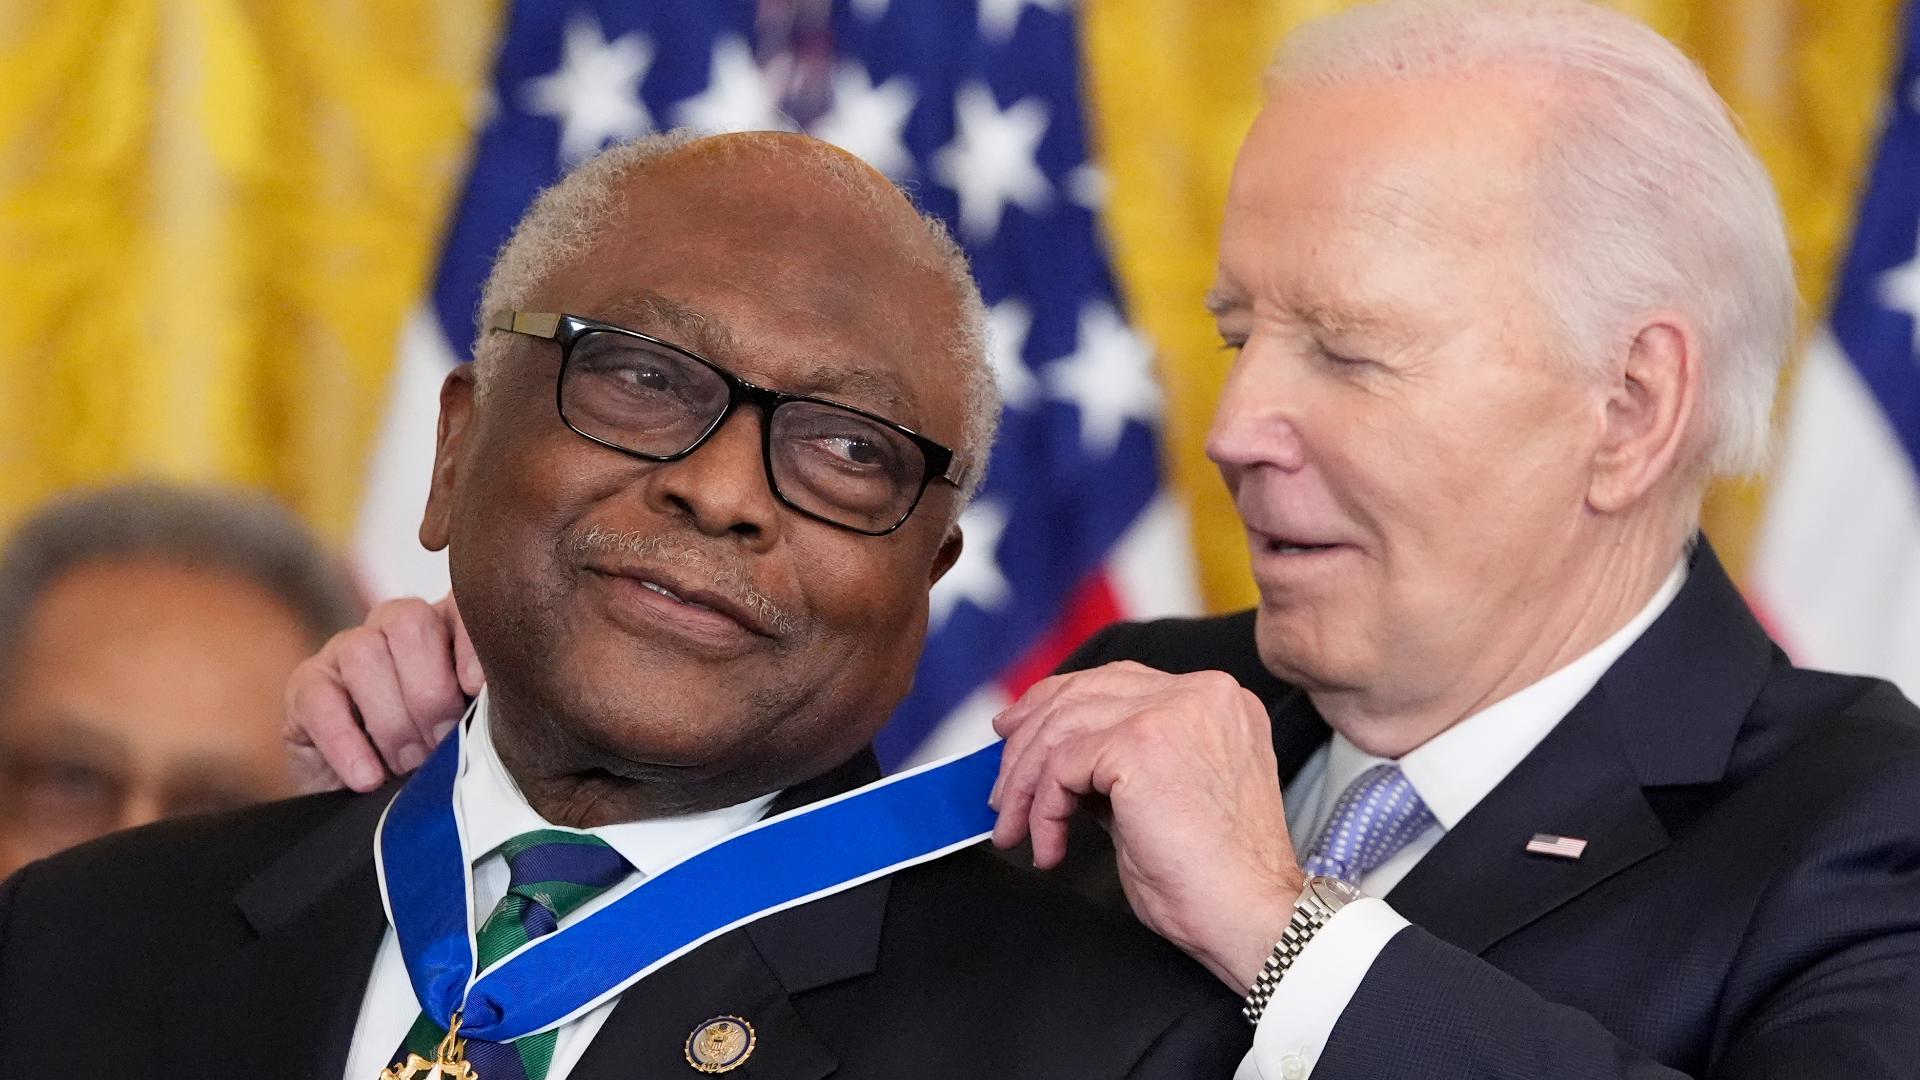 The Medal of Freedom is the nation's highest civilian honor.